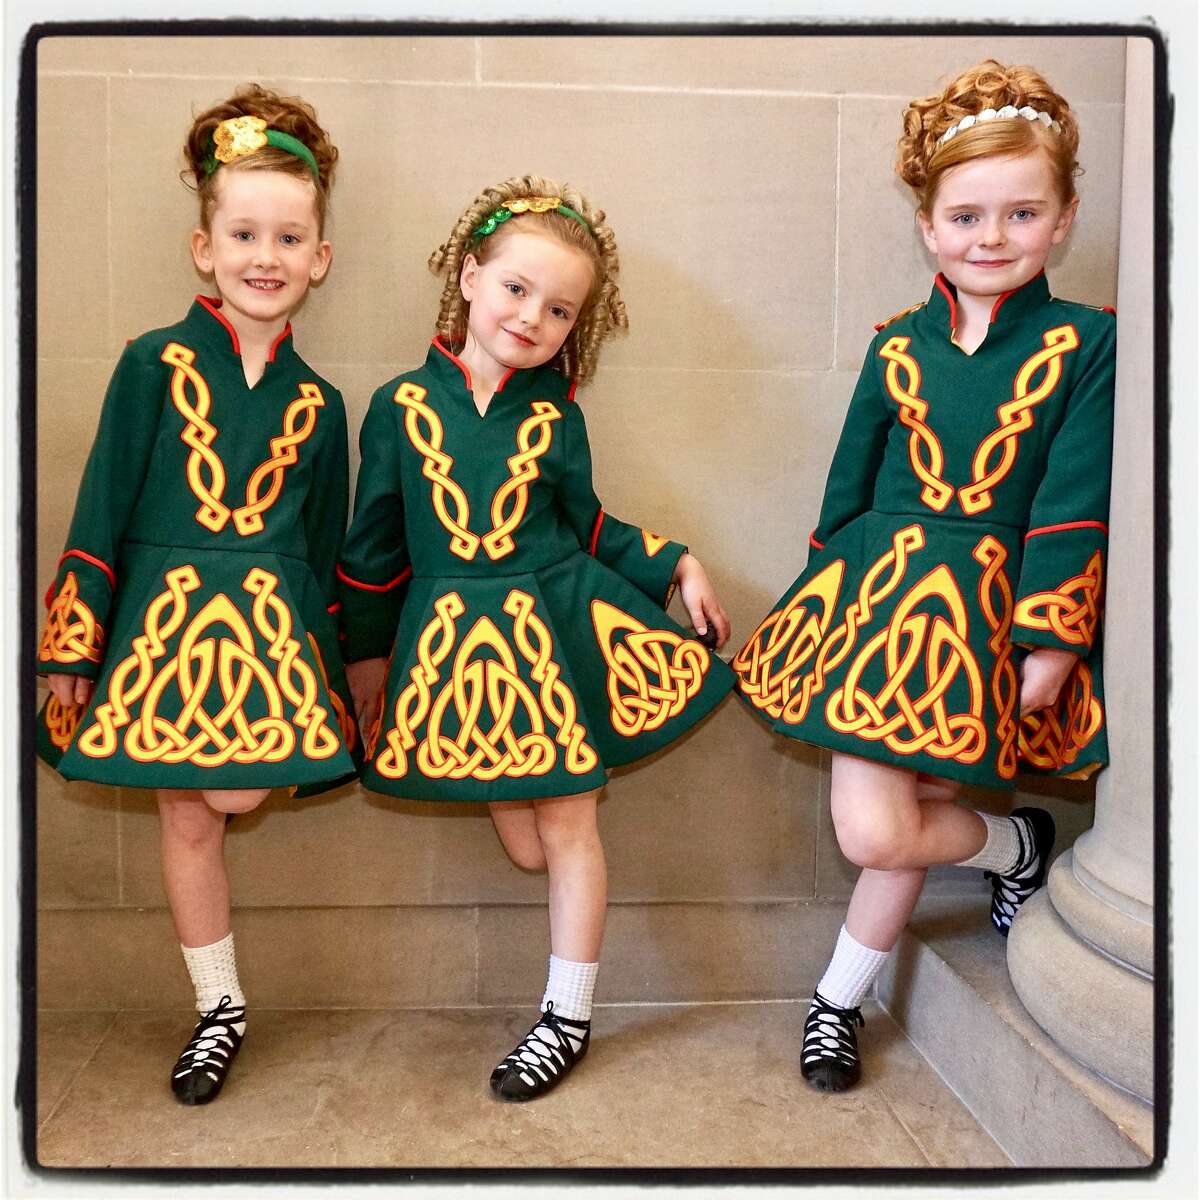 Murphy Irish Dancers (from left) Molly Spillane, Grace Devlin and her sister Neve Devlin at City Hall. March 8, 2019.